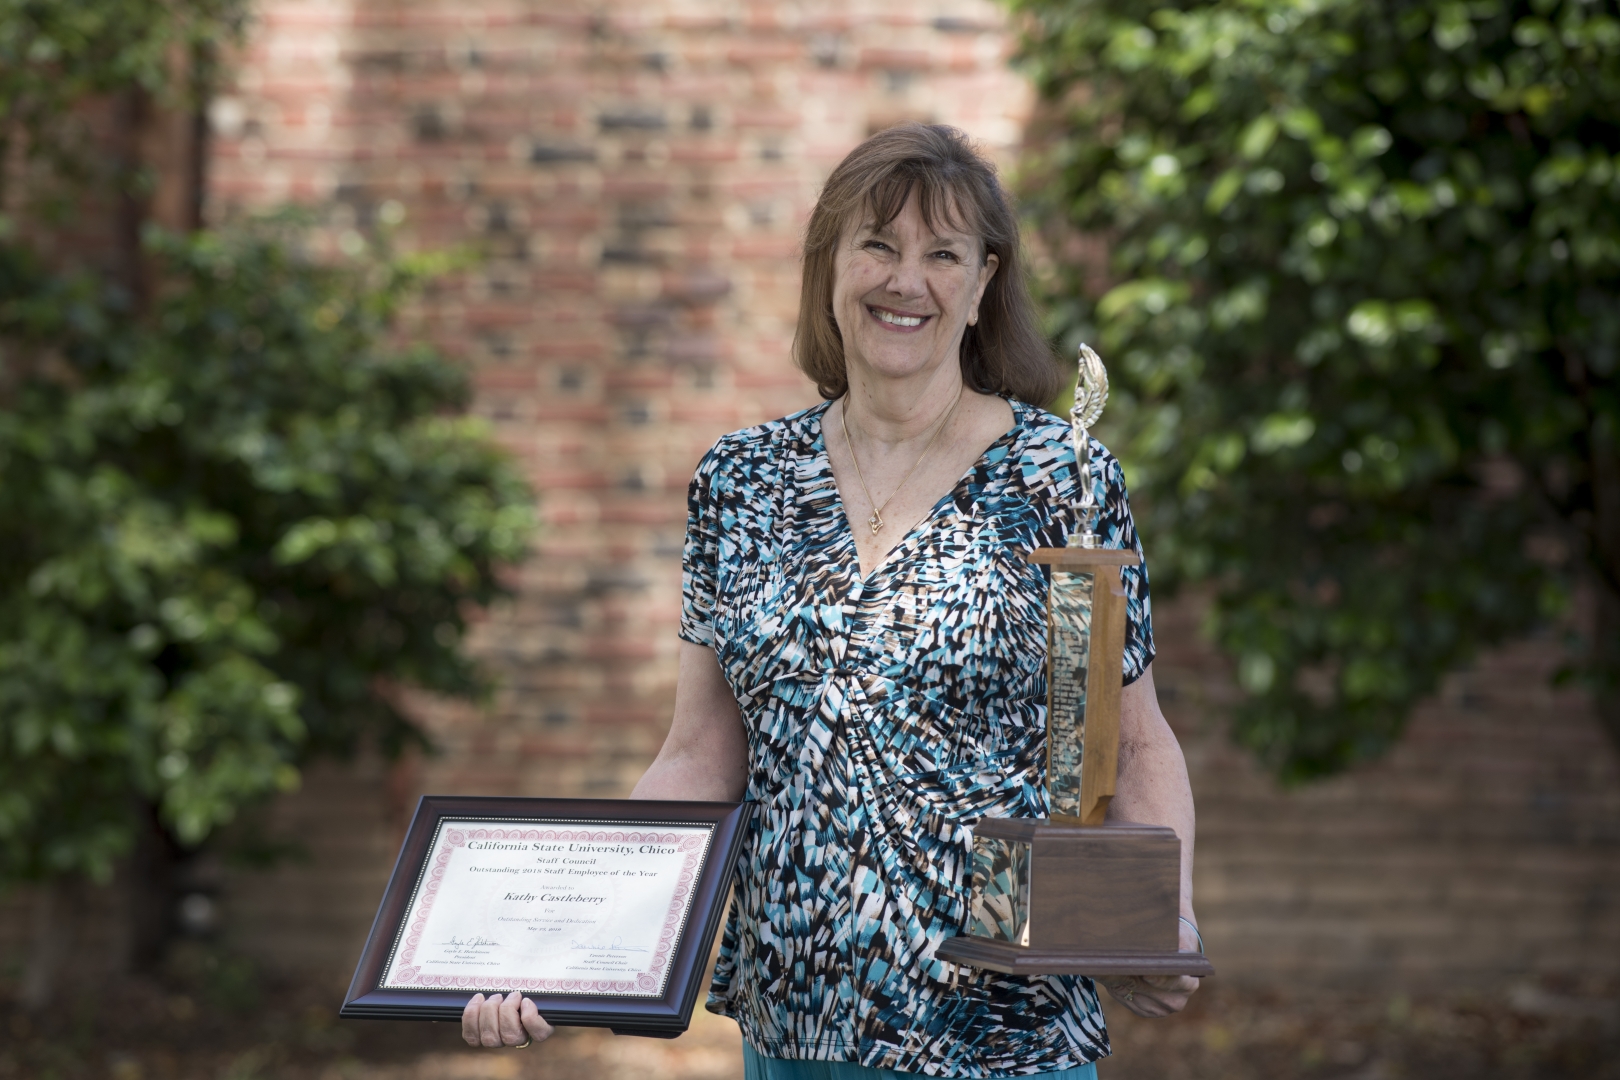 Kathy Castleberry smiles and holds a plaque and trophy, earned for winning Outstanding Staff Employee of the Year.